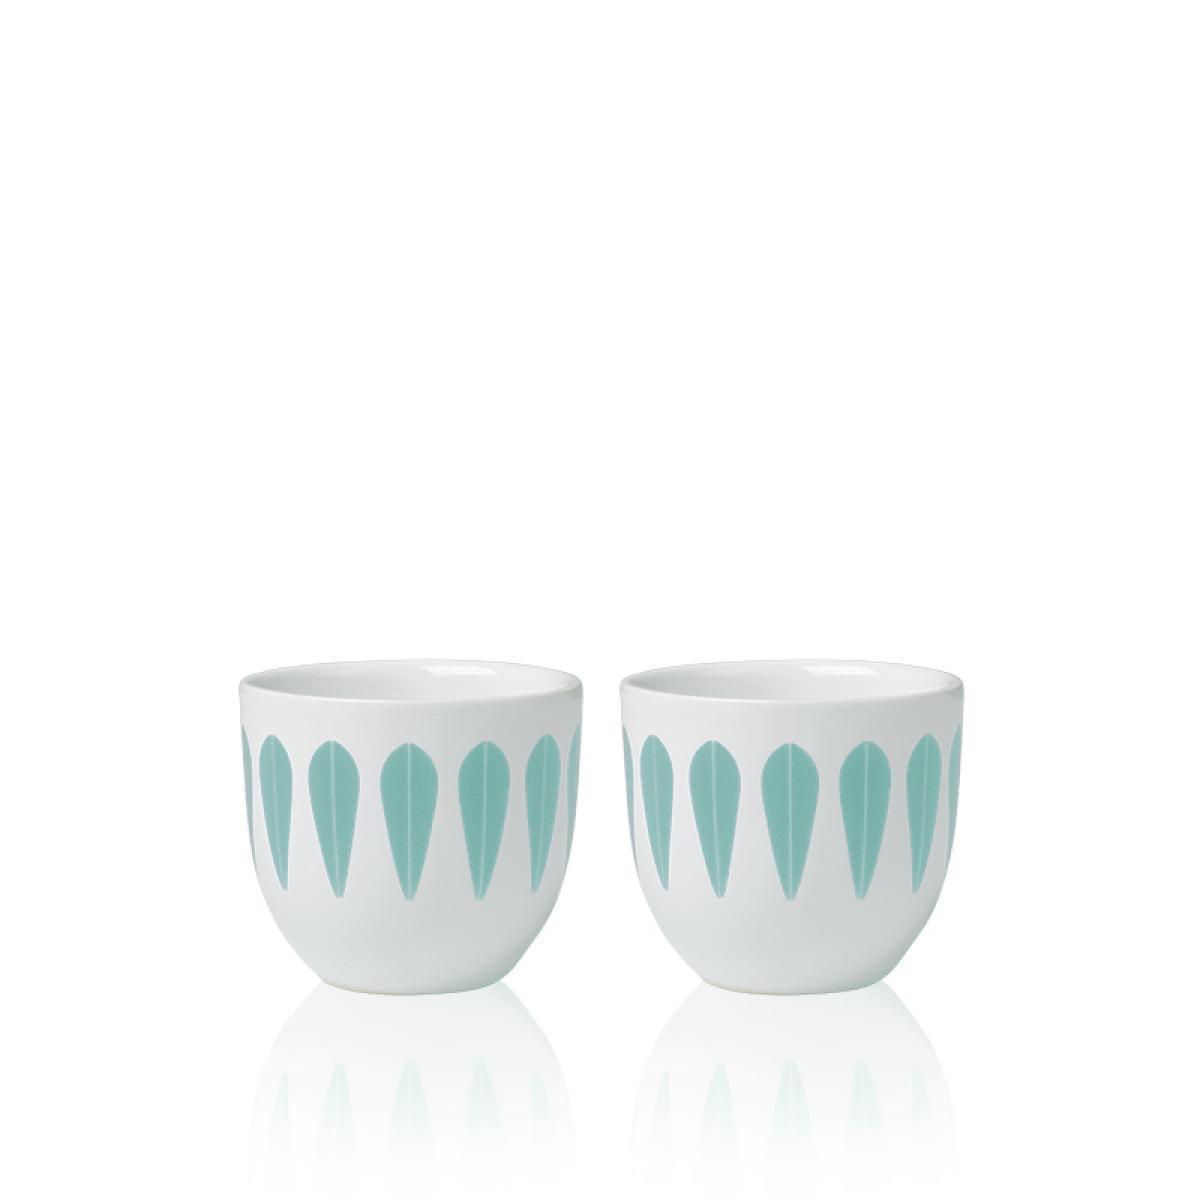 Lucie Kaas Arne Clausen Egg Cup Mint Green, 2 pc's.